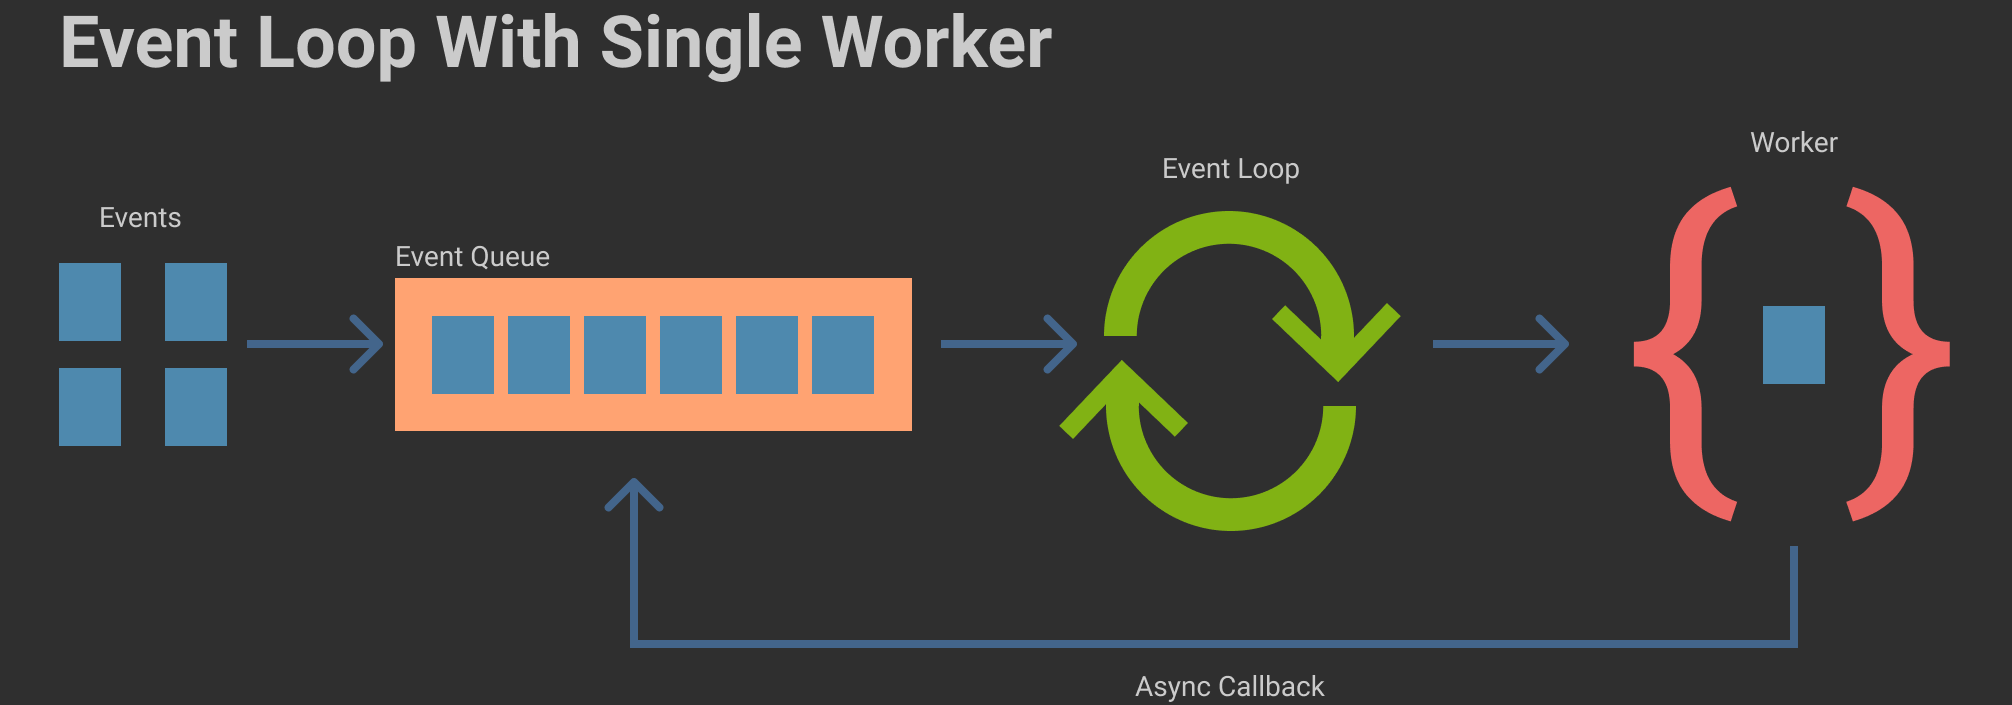 Event Loop with Single Worker